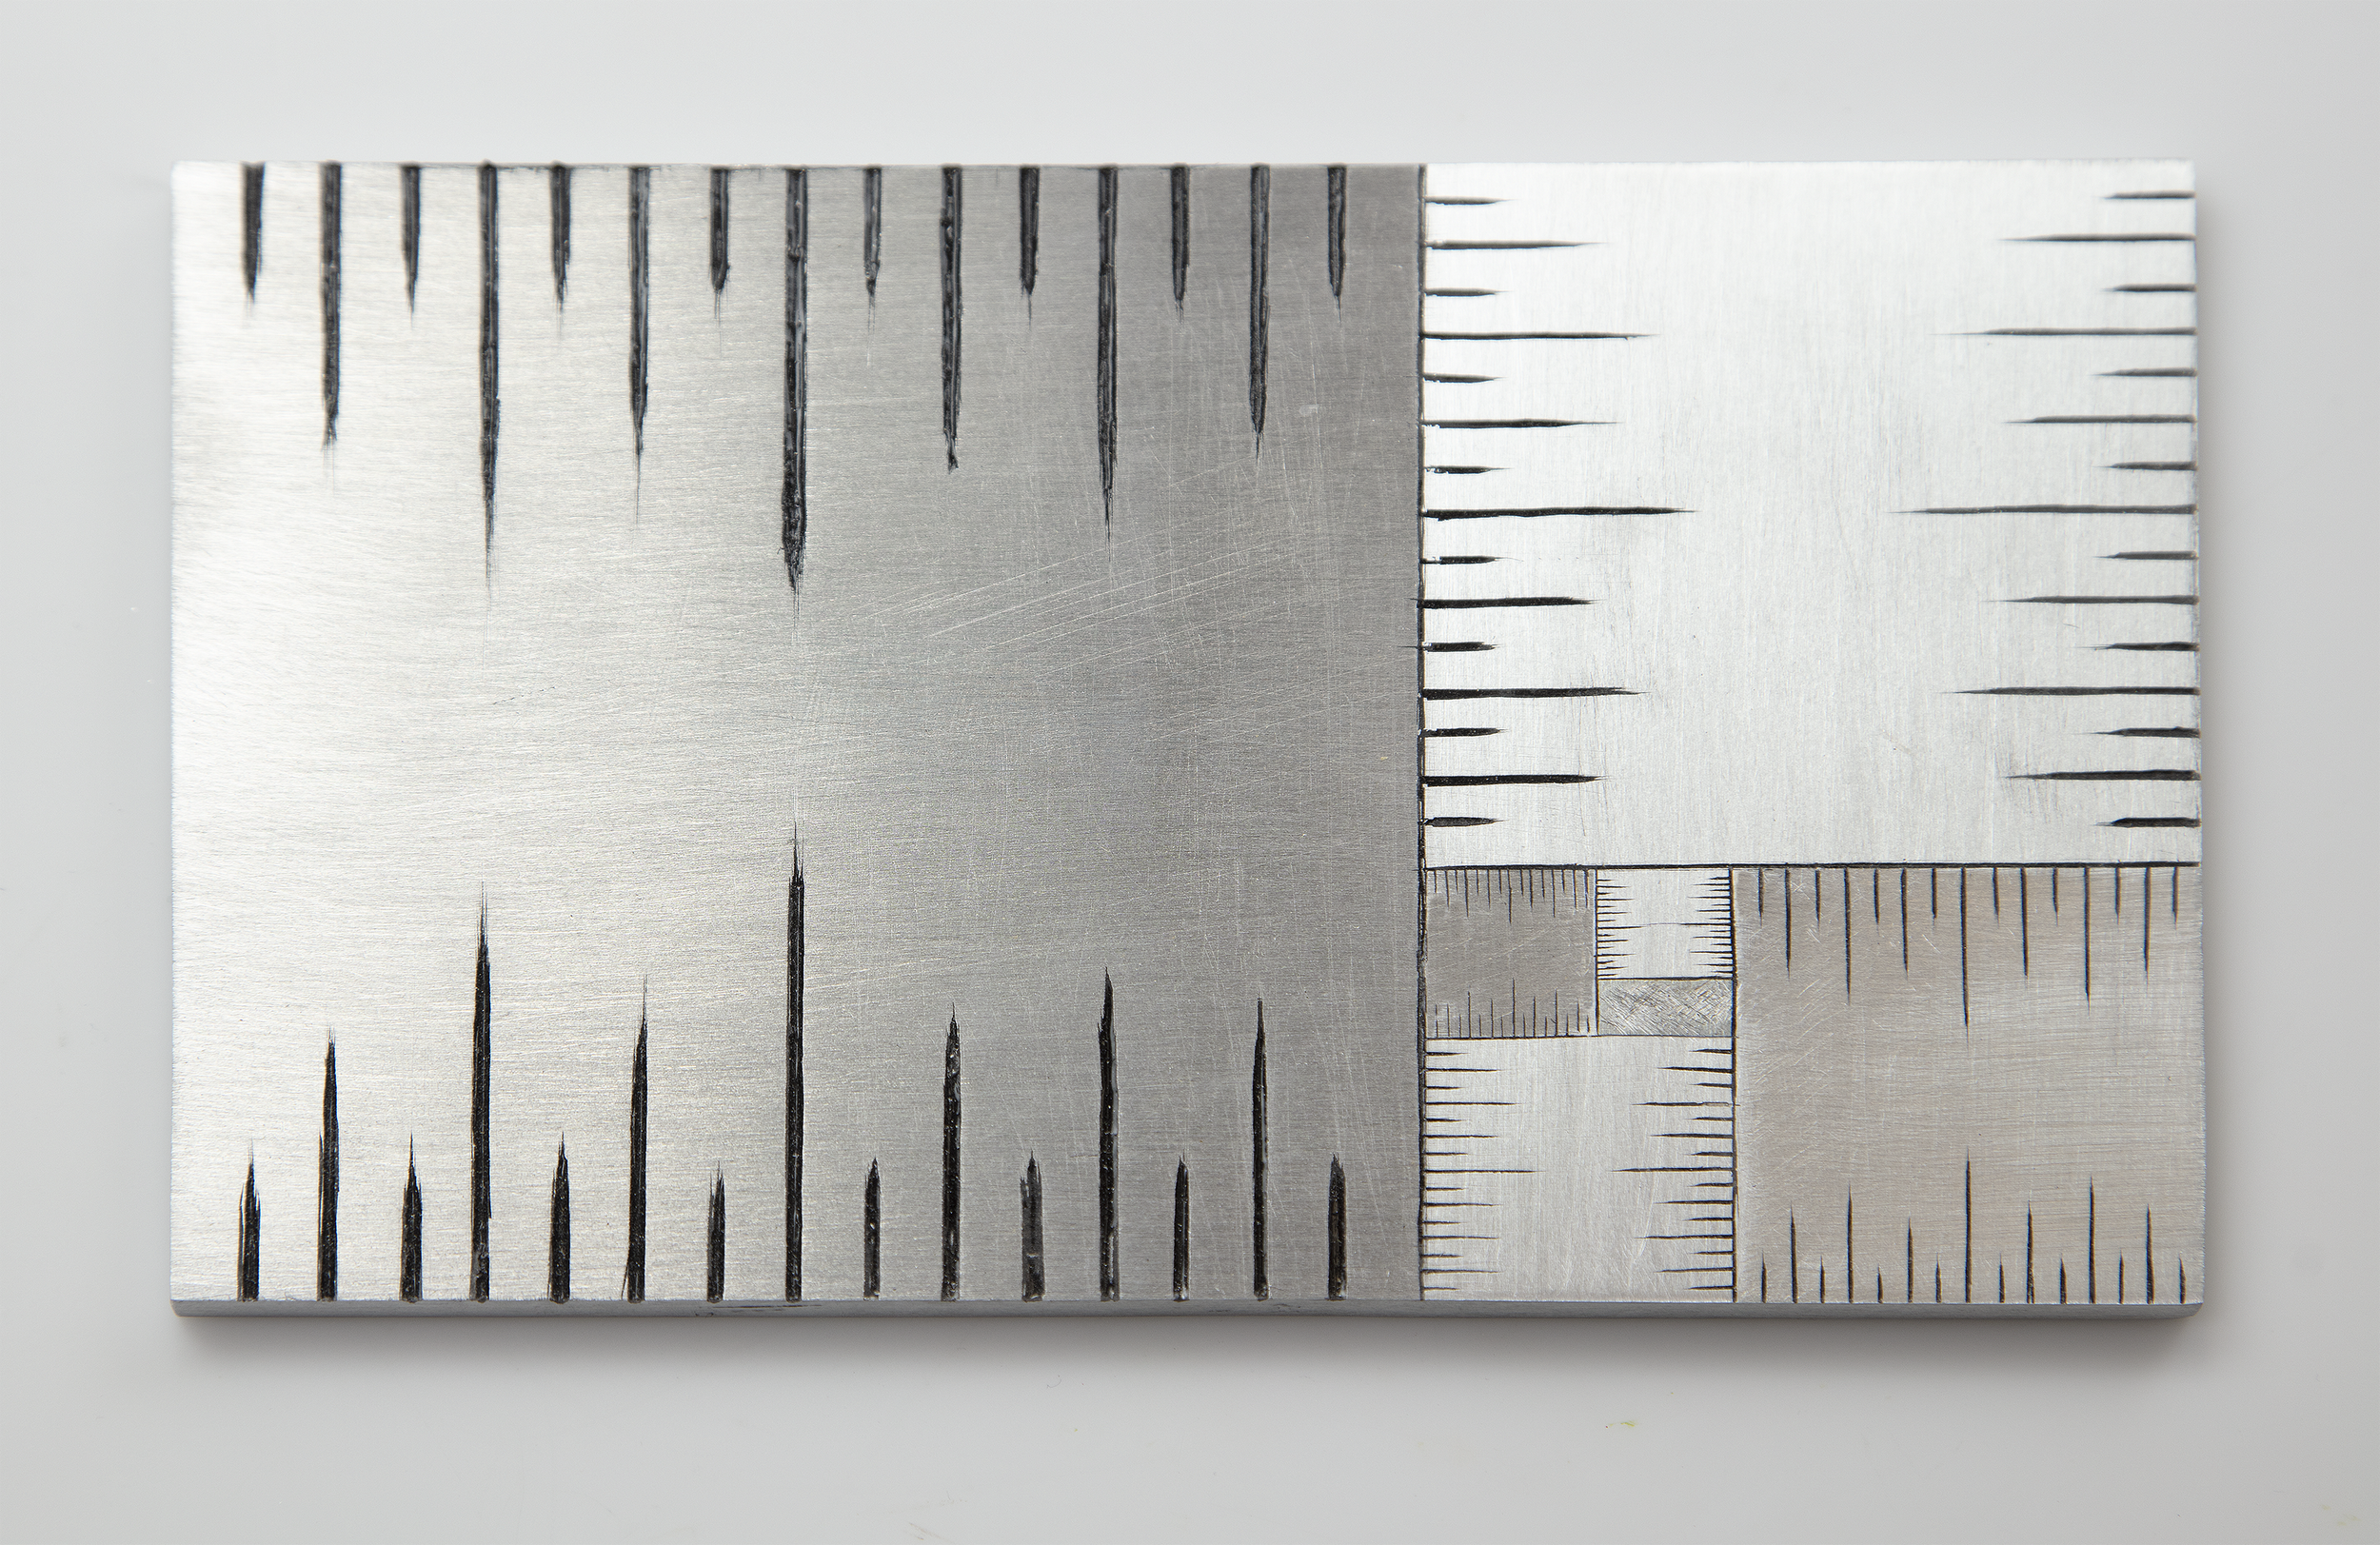 Instrument #182, hand engraved aluminum and ink, 7.25" x 4.5" x .25"